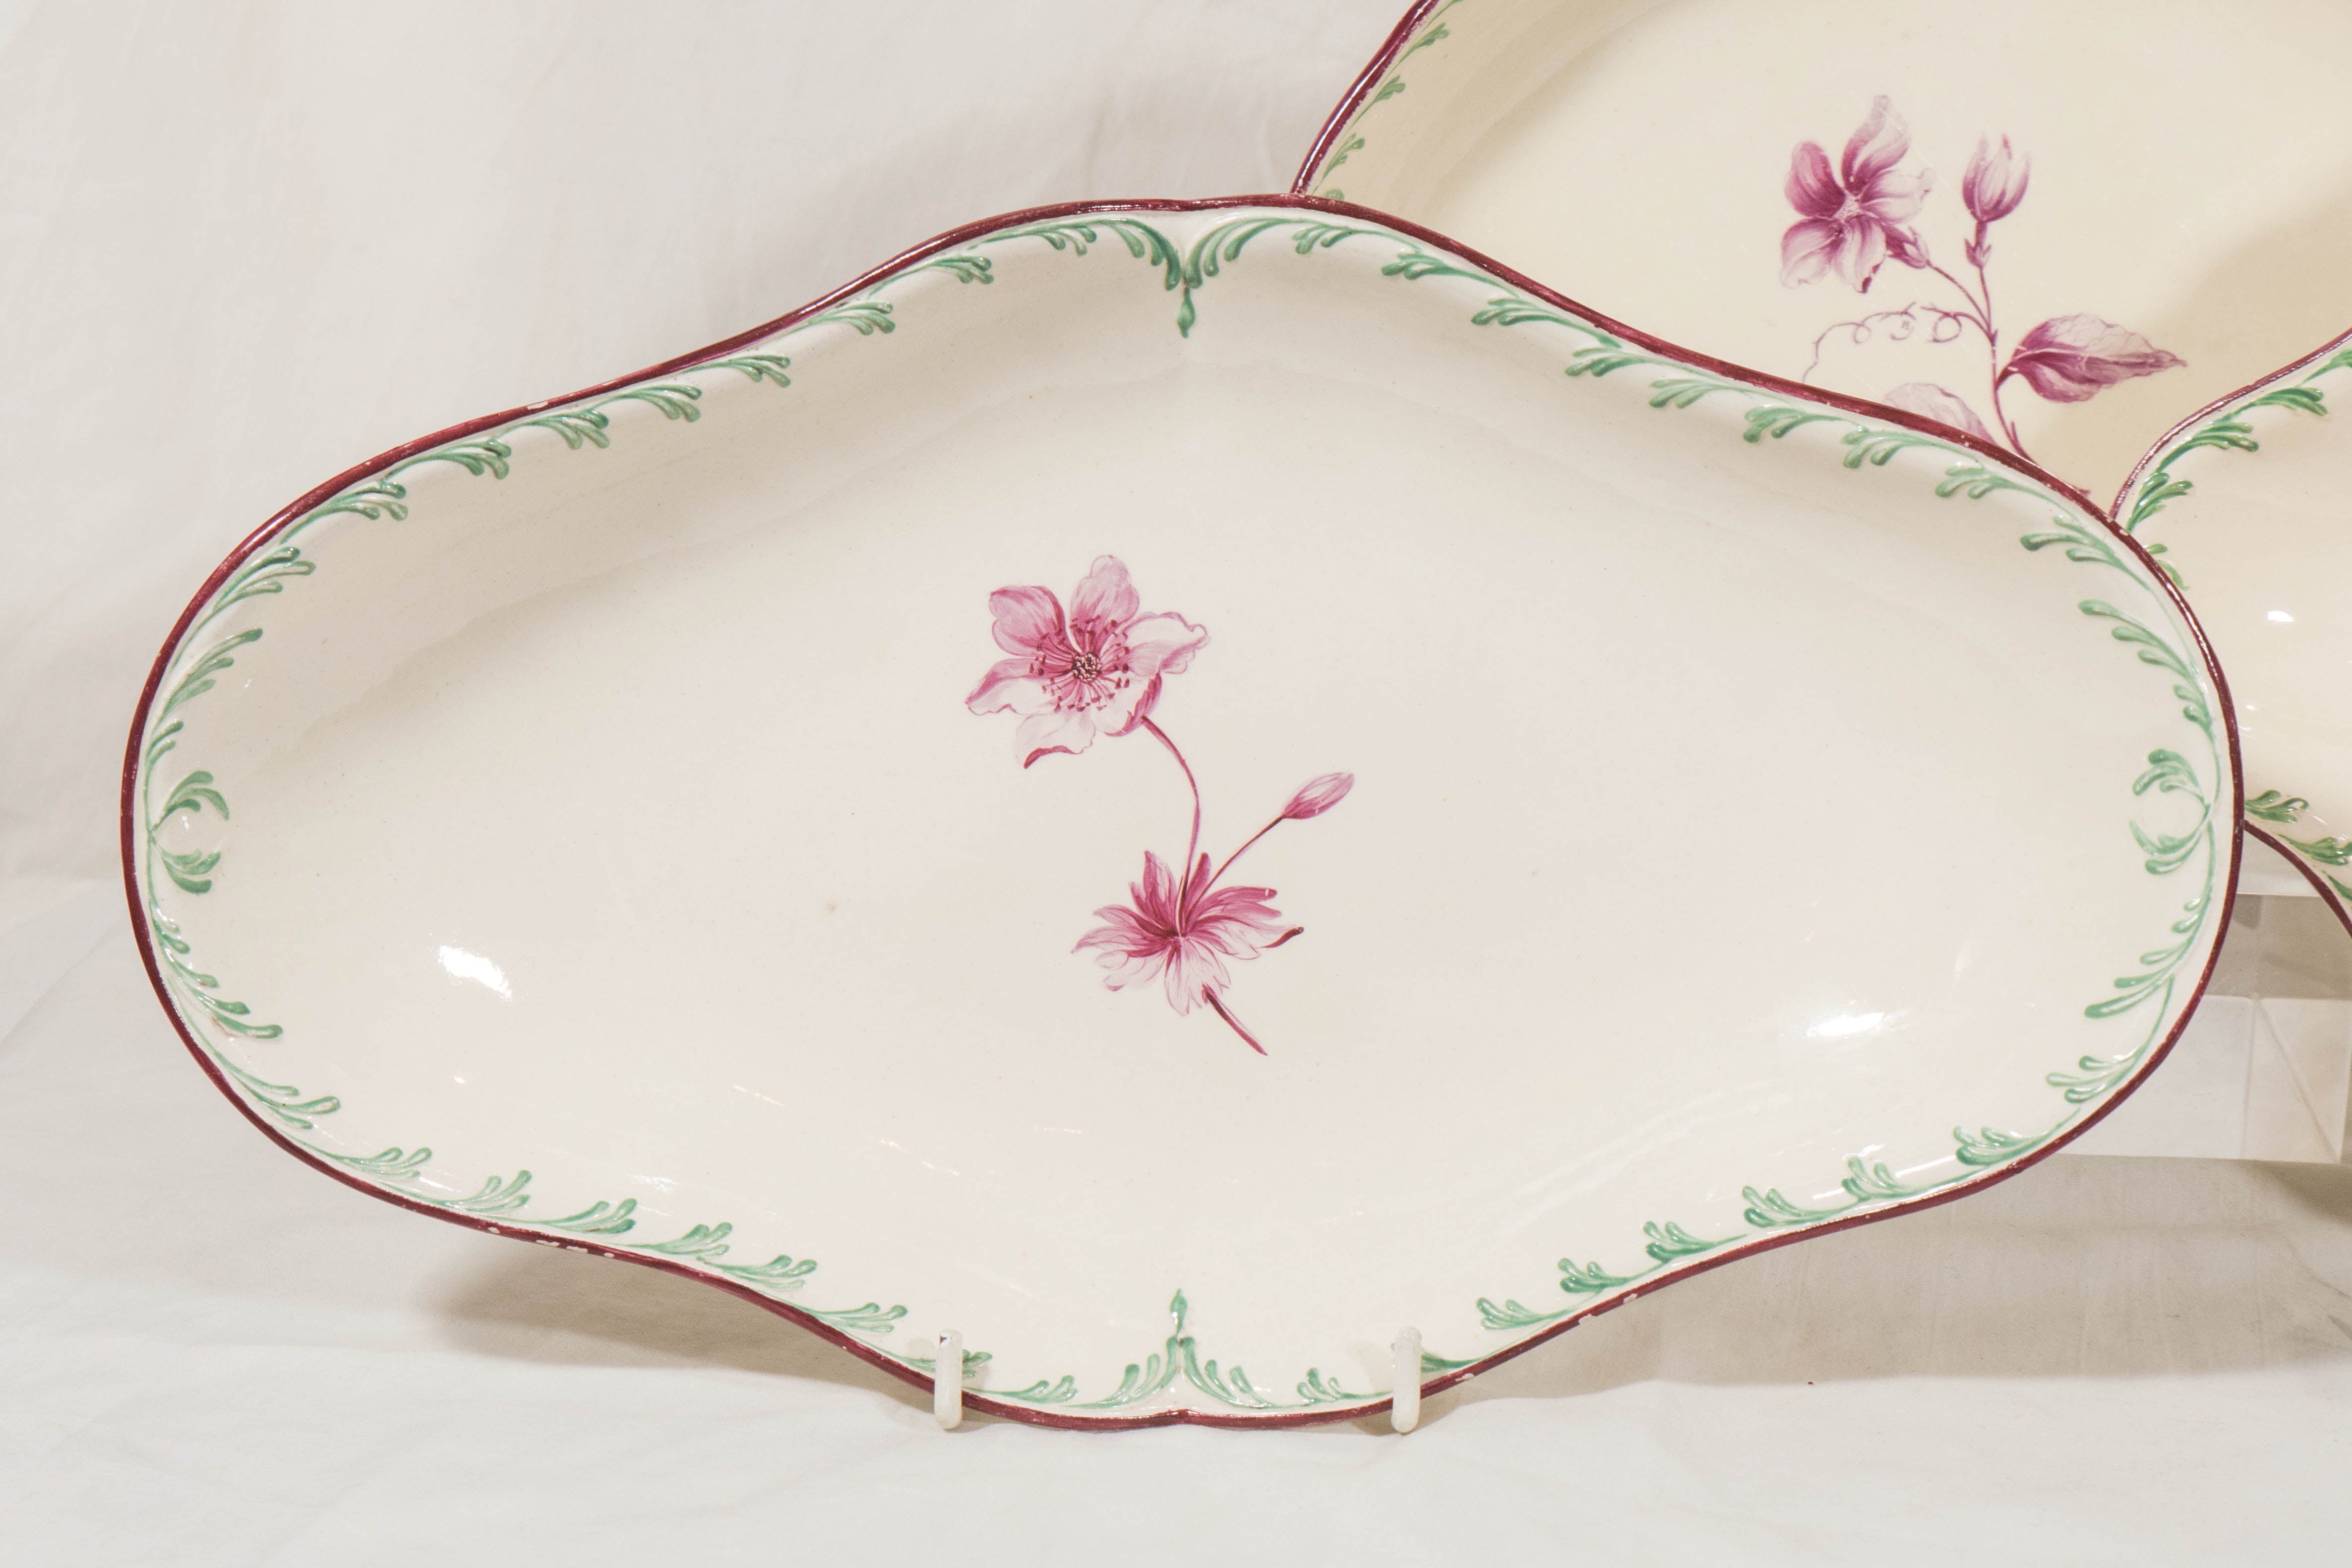 An outstanding group of 18th century Wedgwood creamware dishes each dish delicately decorated with a single purple flower in the center. The borders painted with green feather edge decoration and a purple painted edge.
Most likely these dishes were